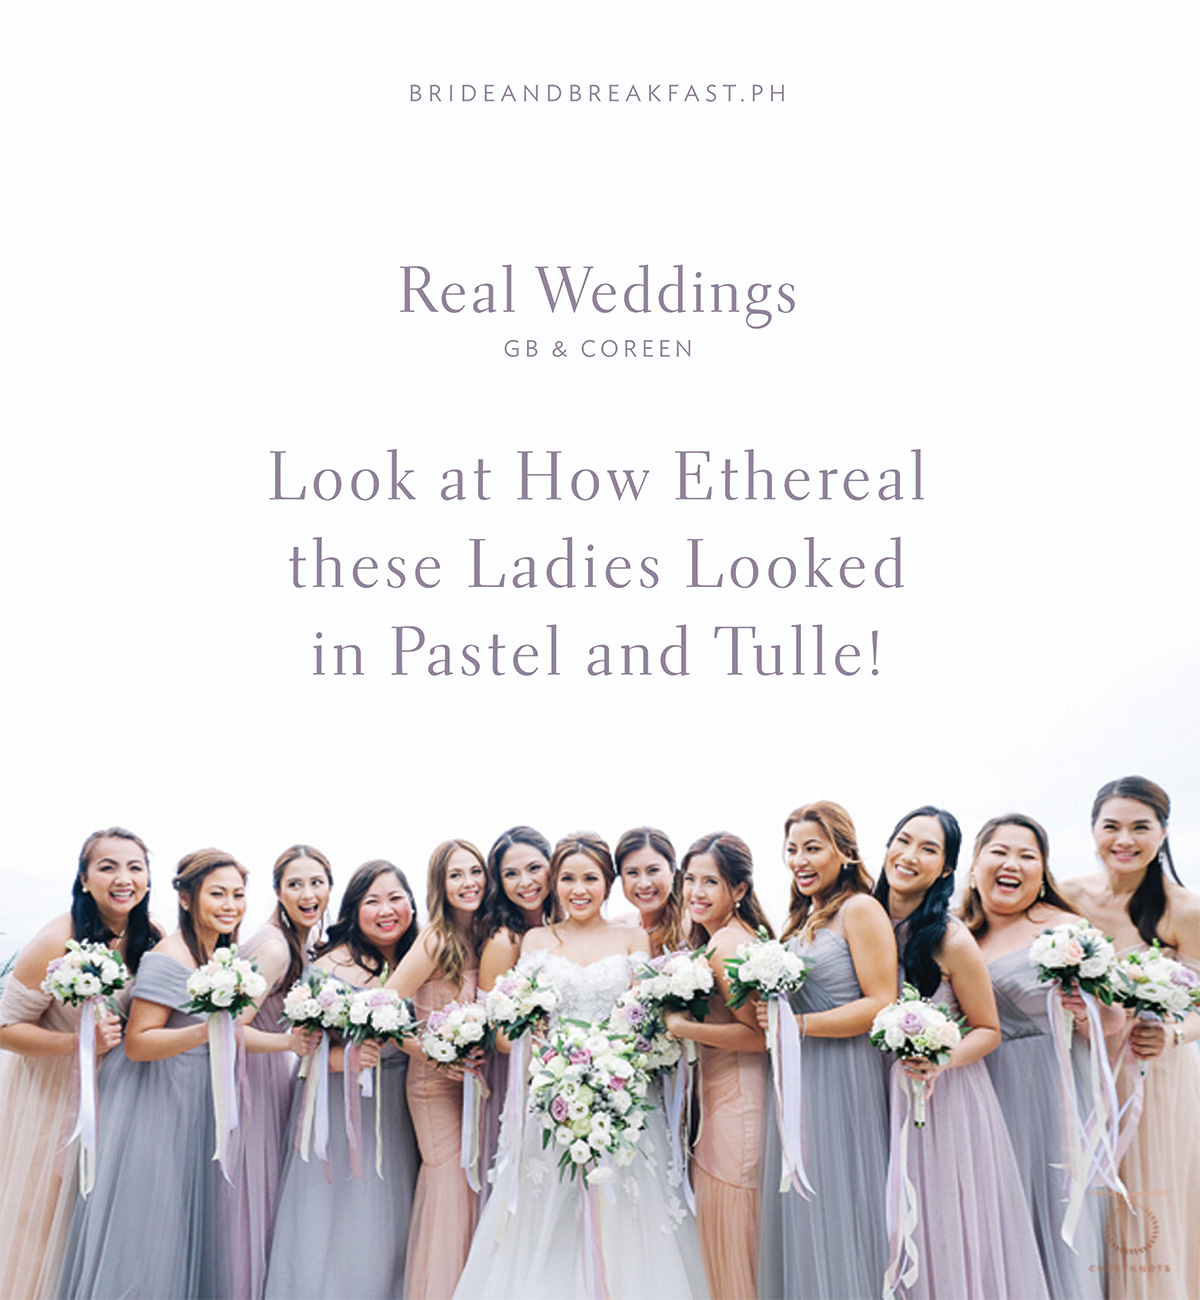 Look at How Ethereal these Ladies Looked in Pastel and Tulle!